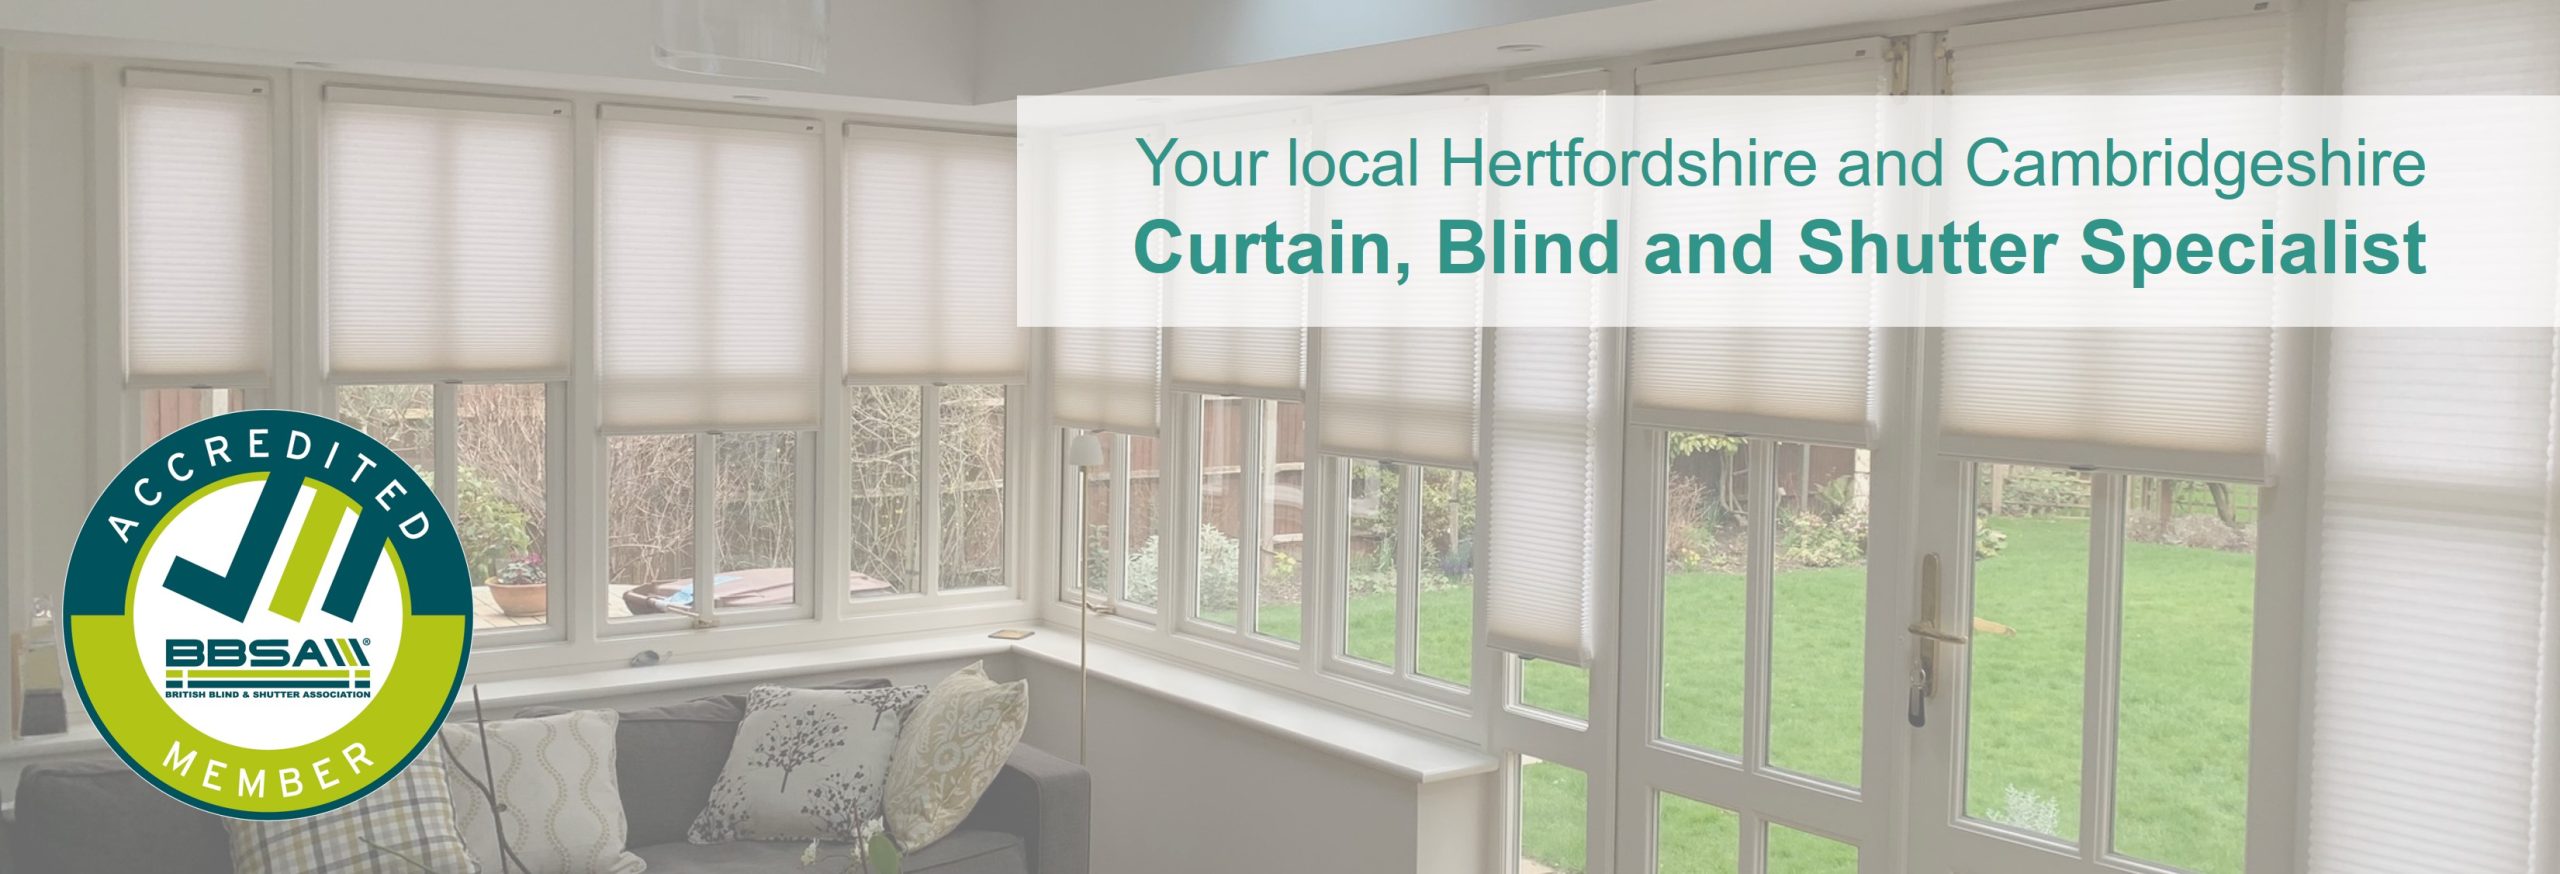 pleated blinds in a conservatory - your local hertfordshire and cambridgeshire curtain, blind and shutter specialist